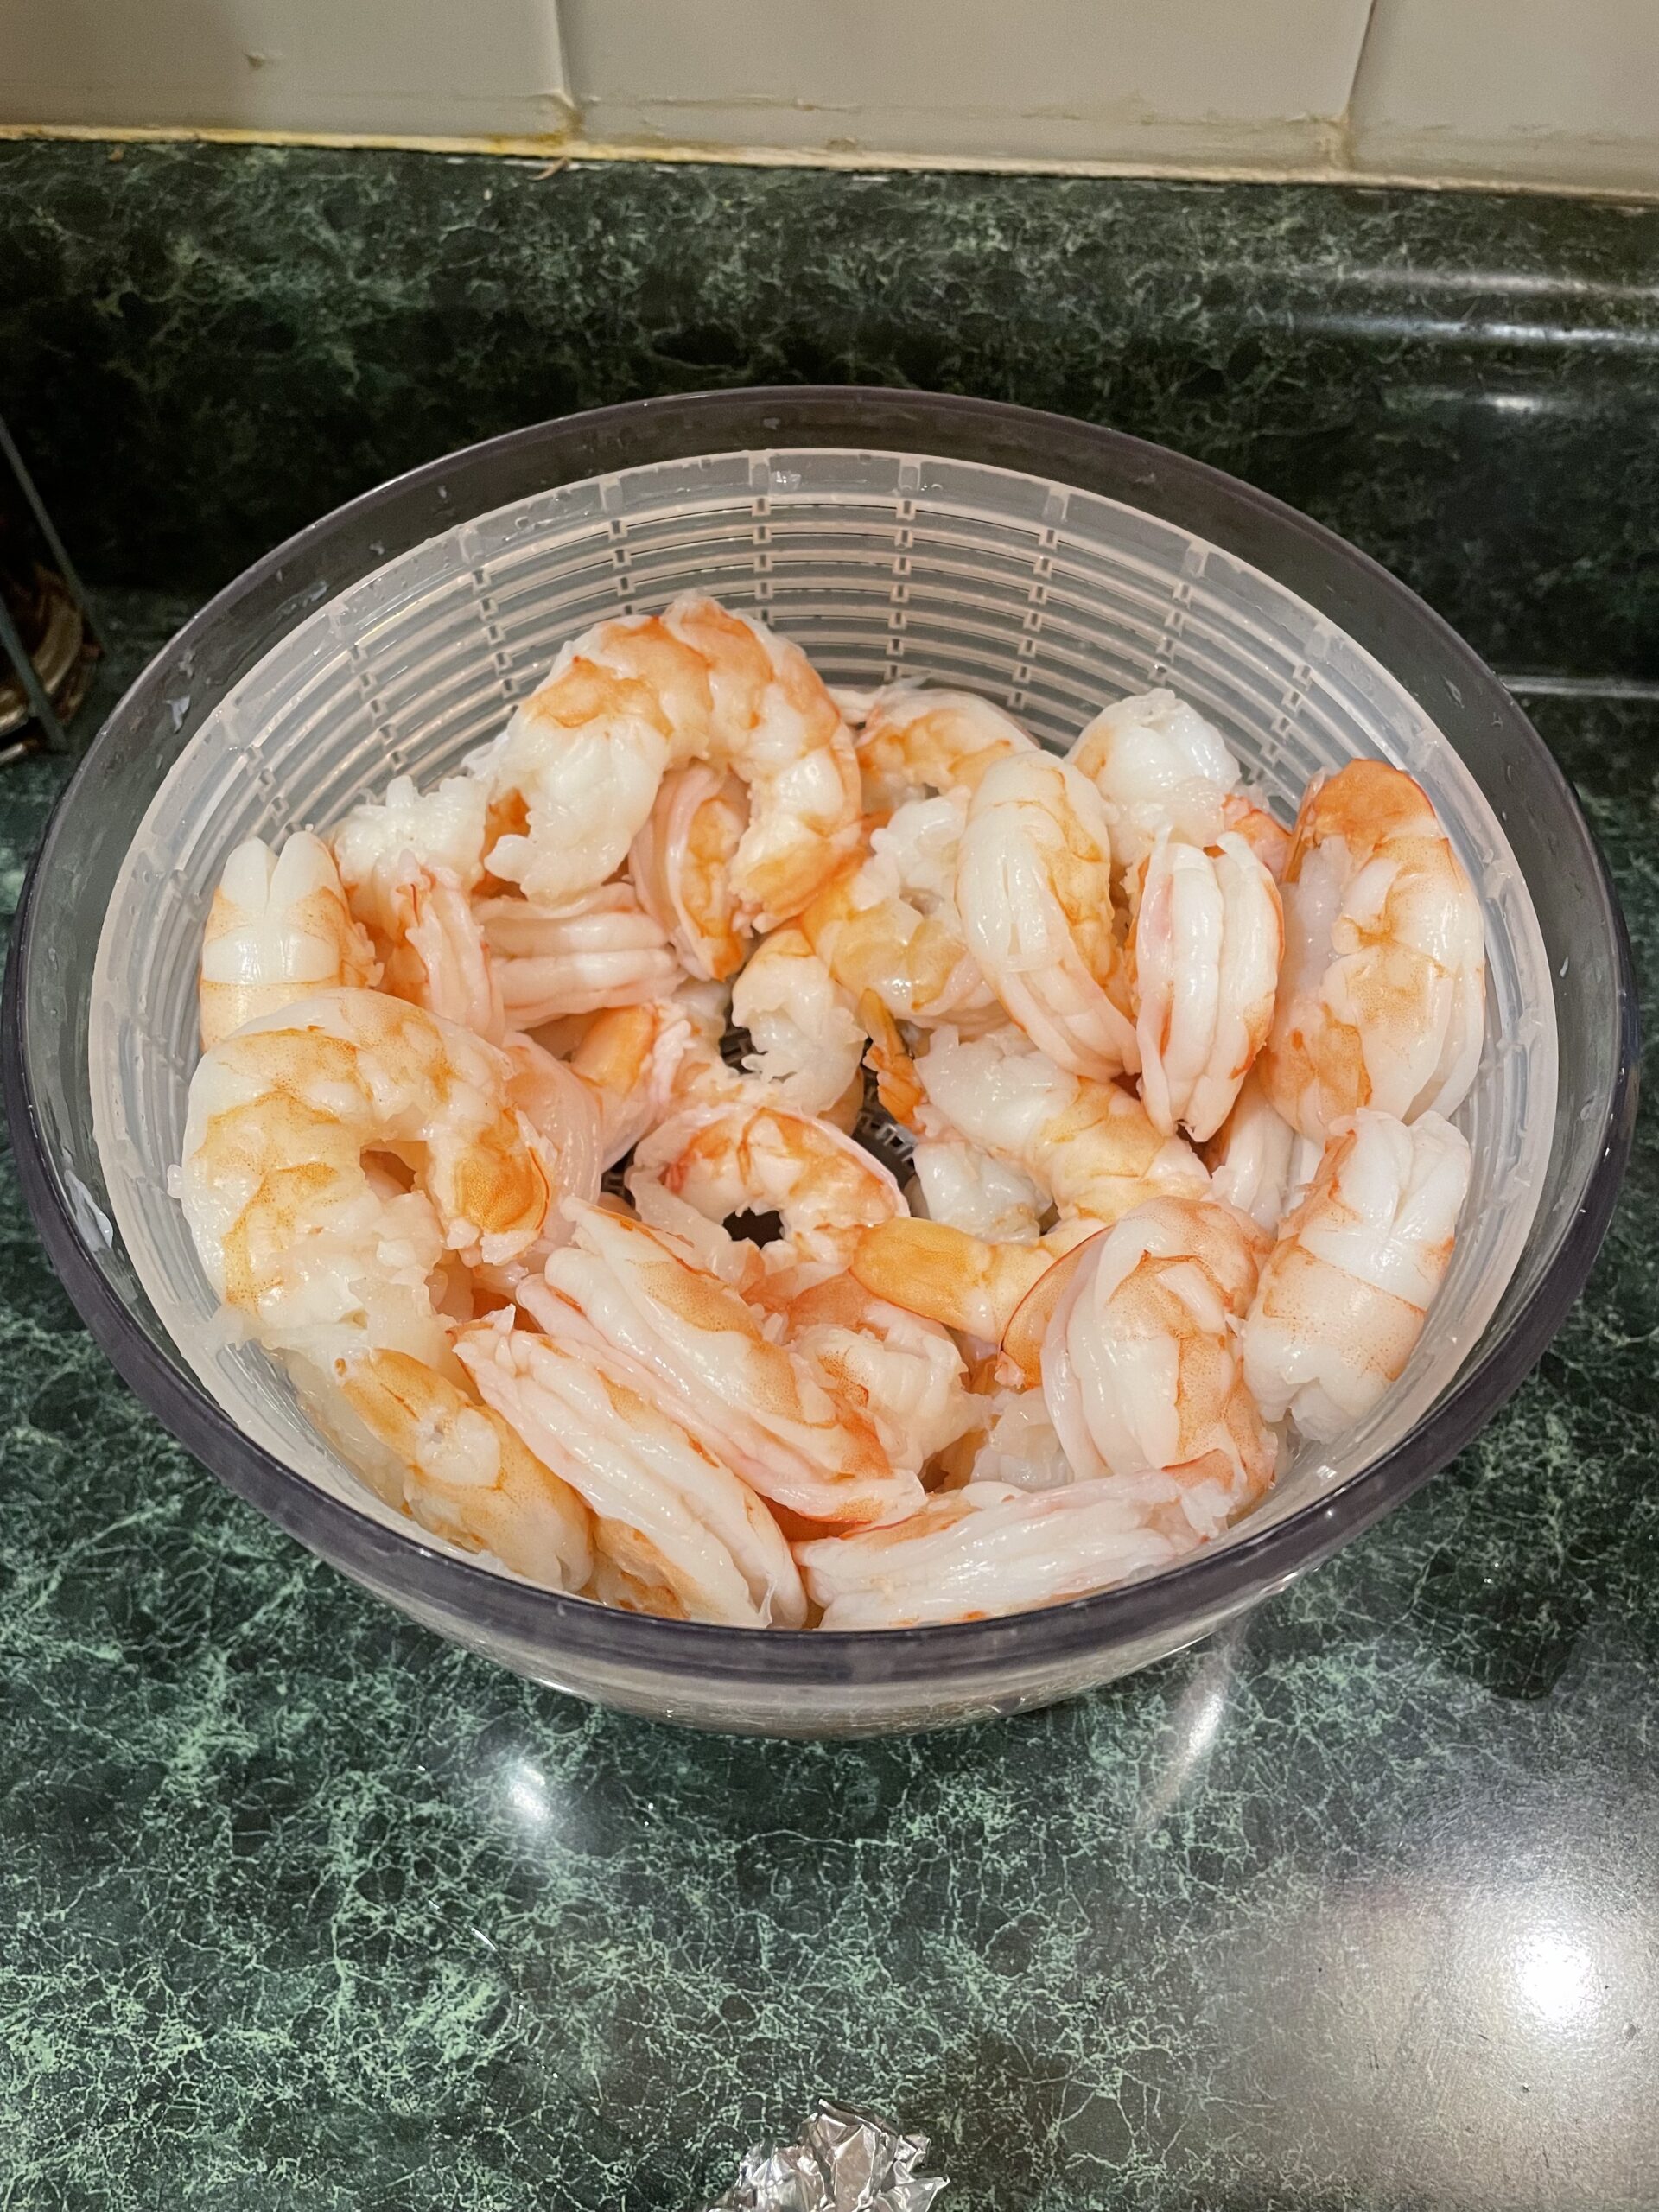 Preparing your shrimp is the first step to making ceviche. Kimberly Cruz | The Montclarion